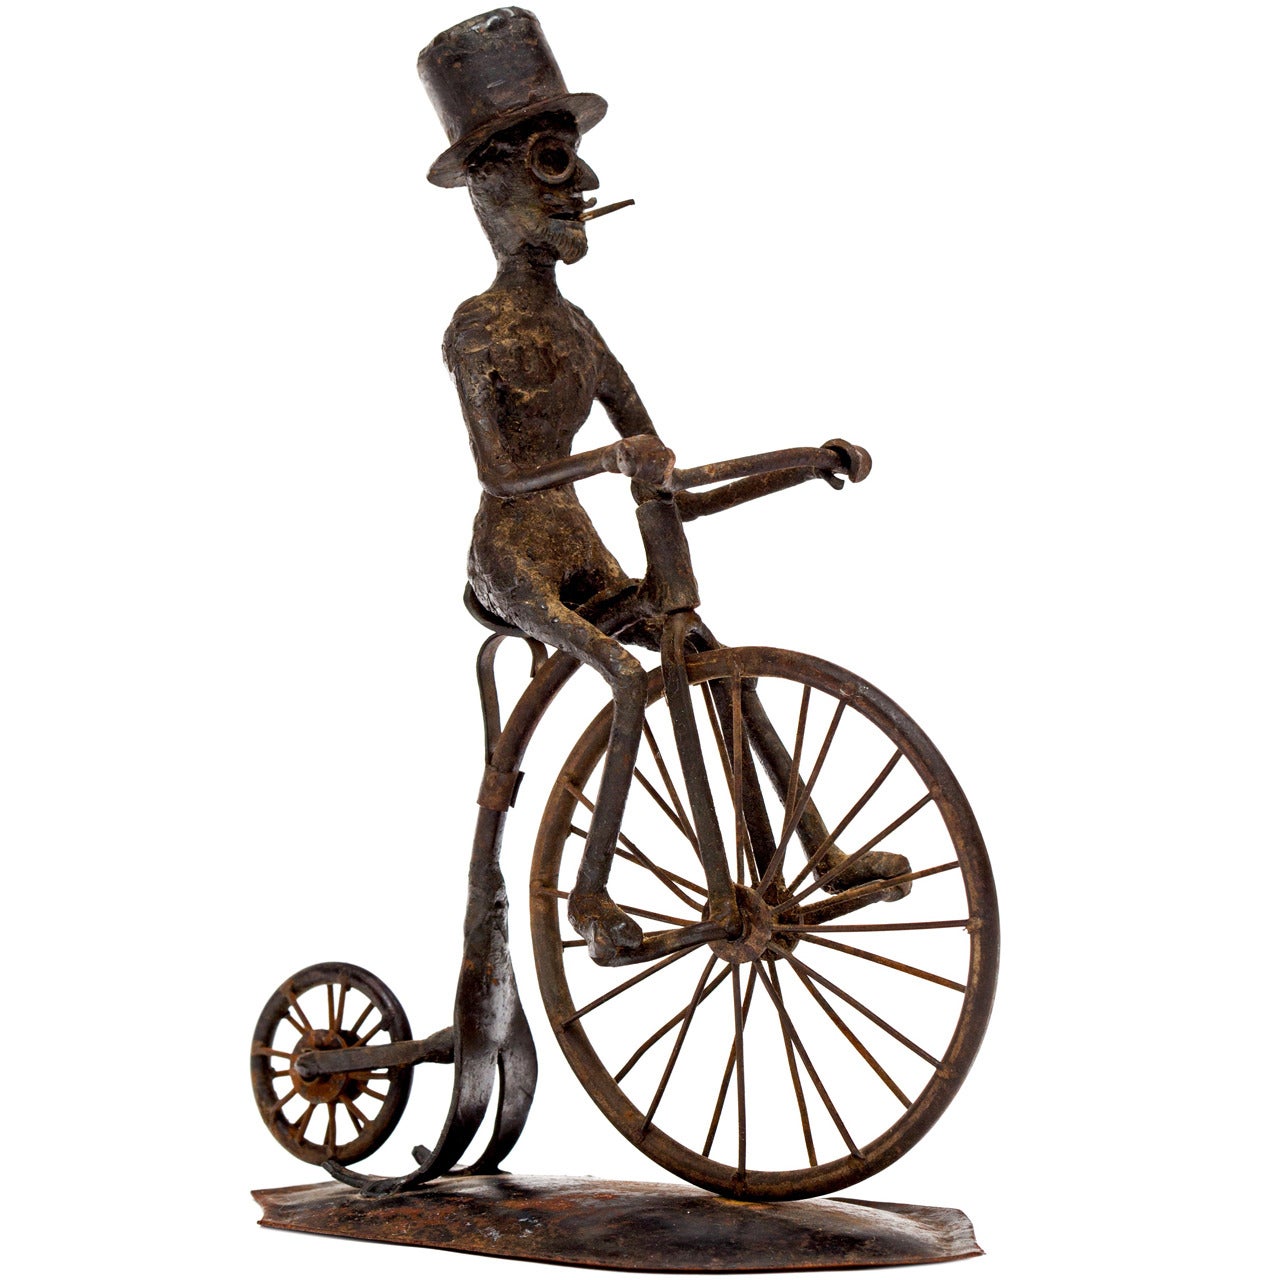 Pair of Black Smith Art Sculptures of a Bicyclist and a Hunter, circa 1900s